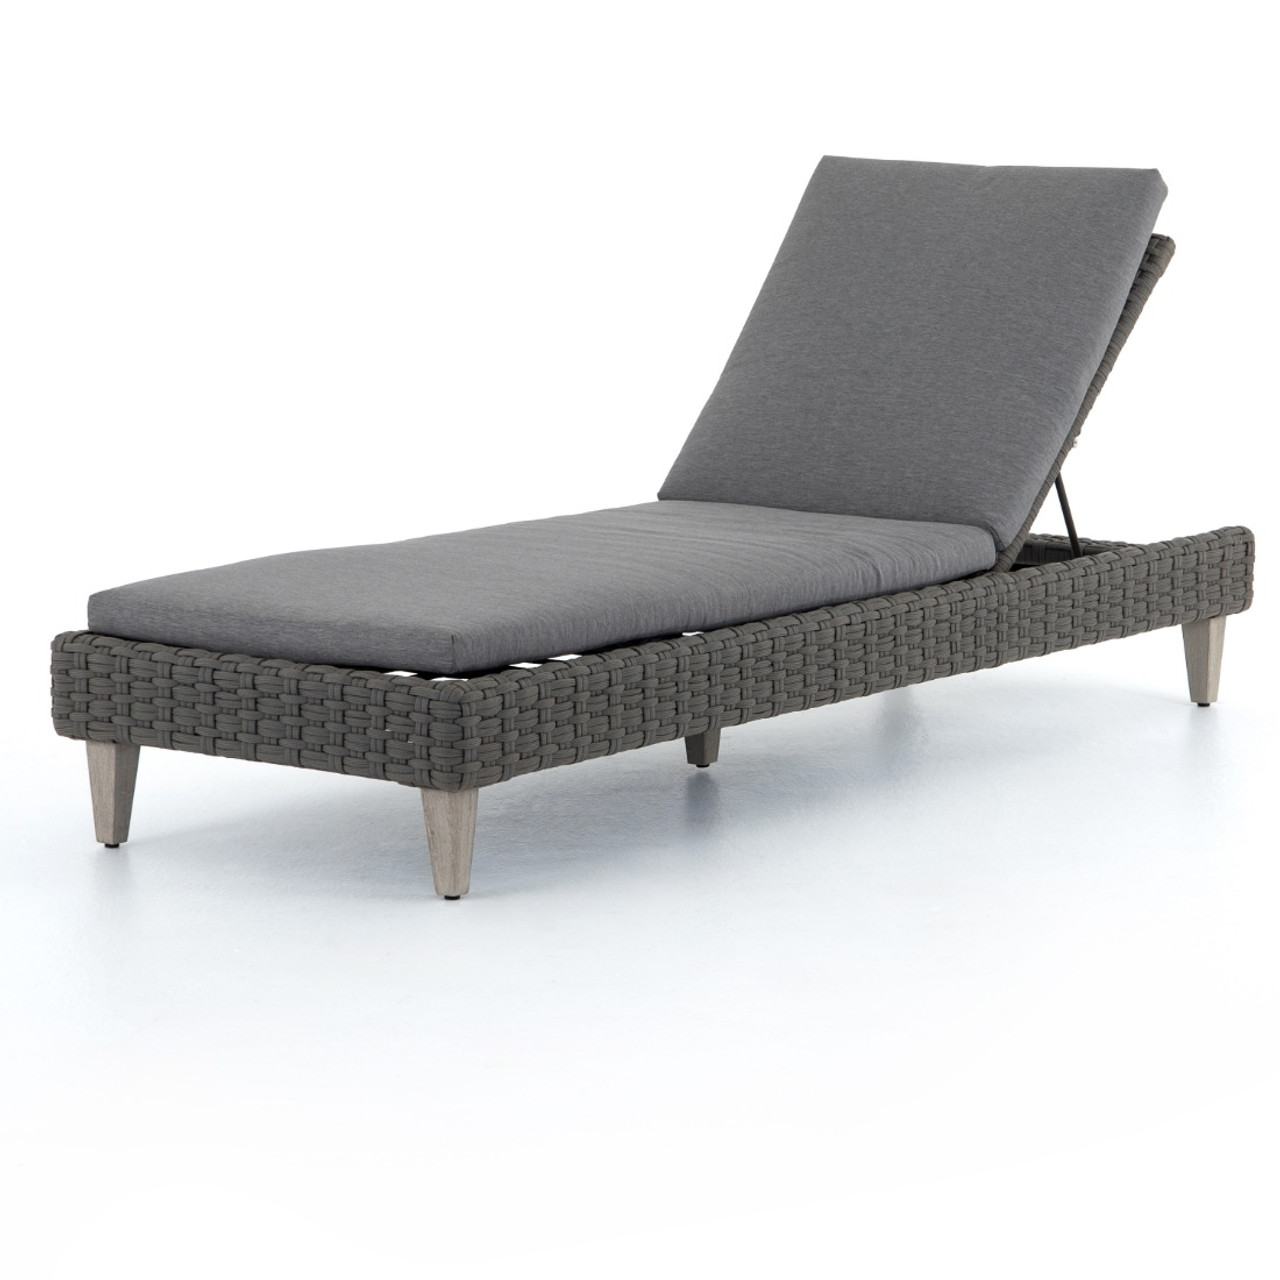 Remi Charcoal Woven Rope Outdoor Chaise Lounge | Zin Home